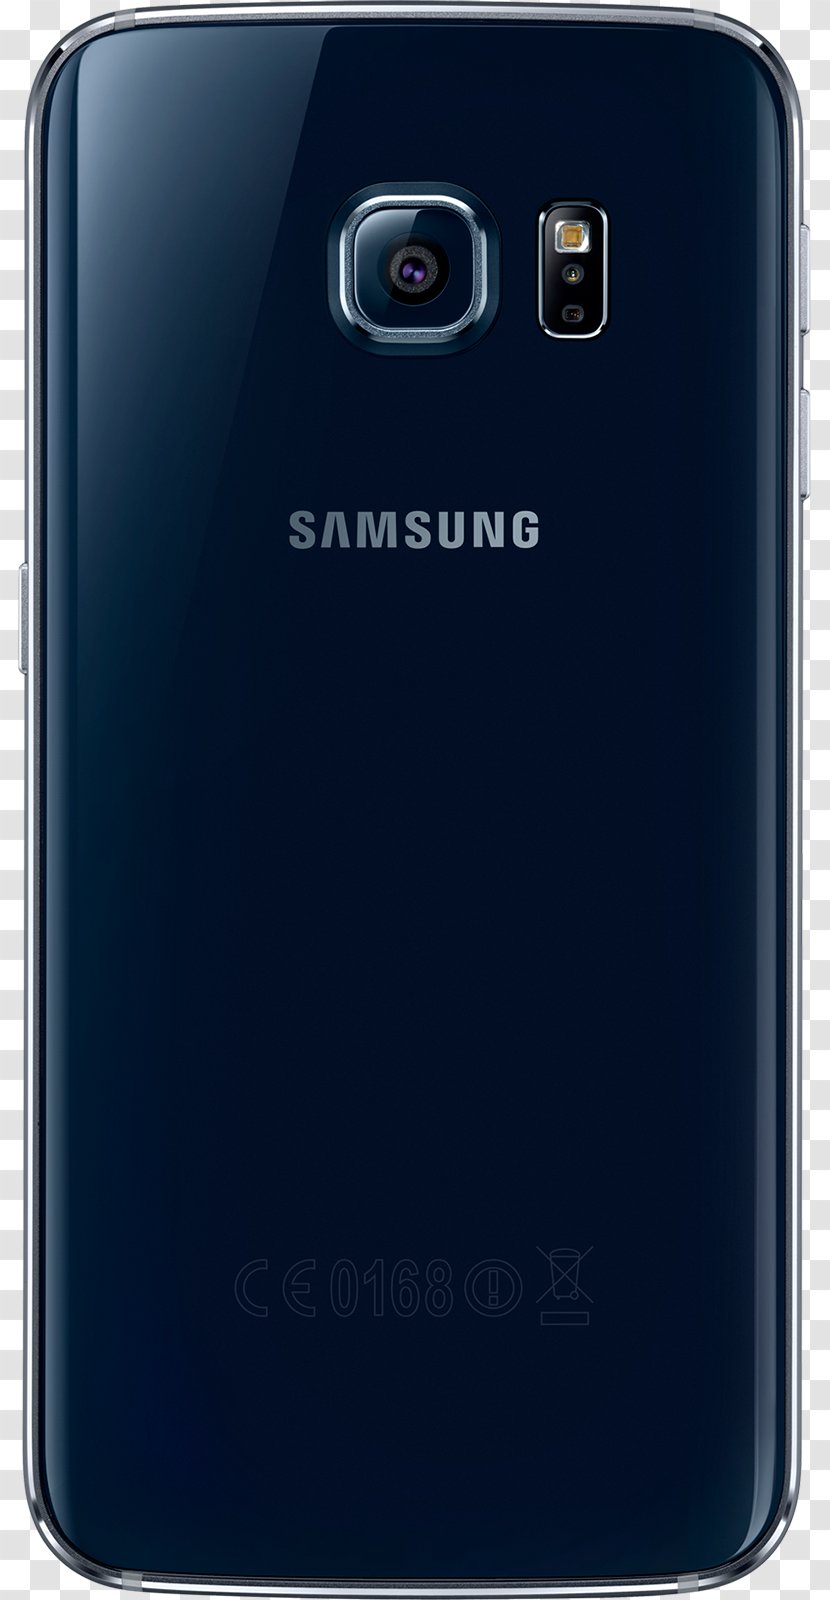 Samsung Galaxy S7 Android Telephone Smartphone - Mobile Phone - S6edga Transparent PNG